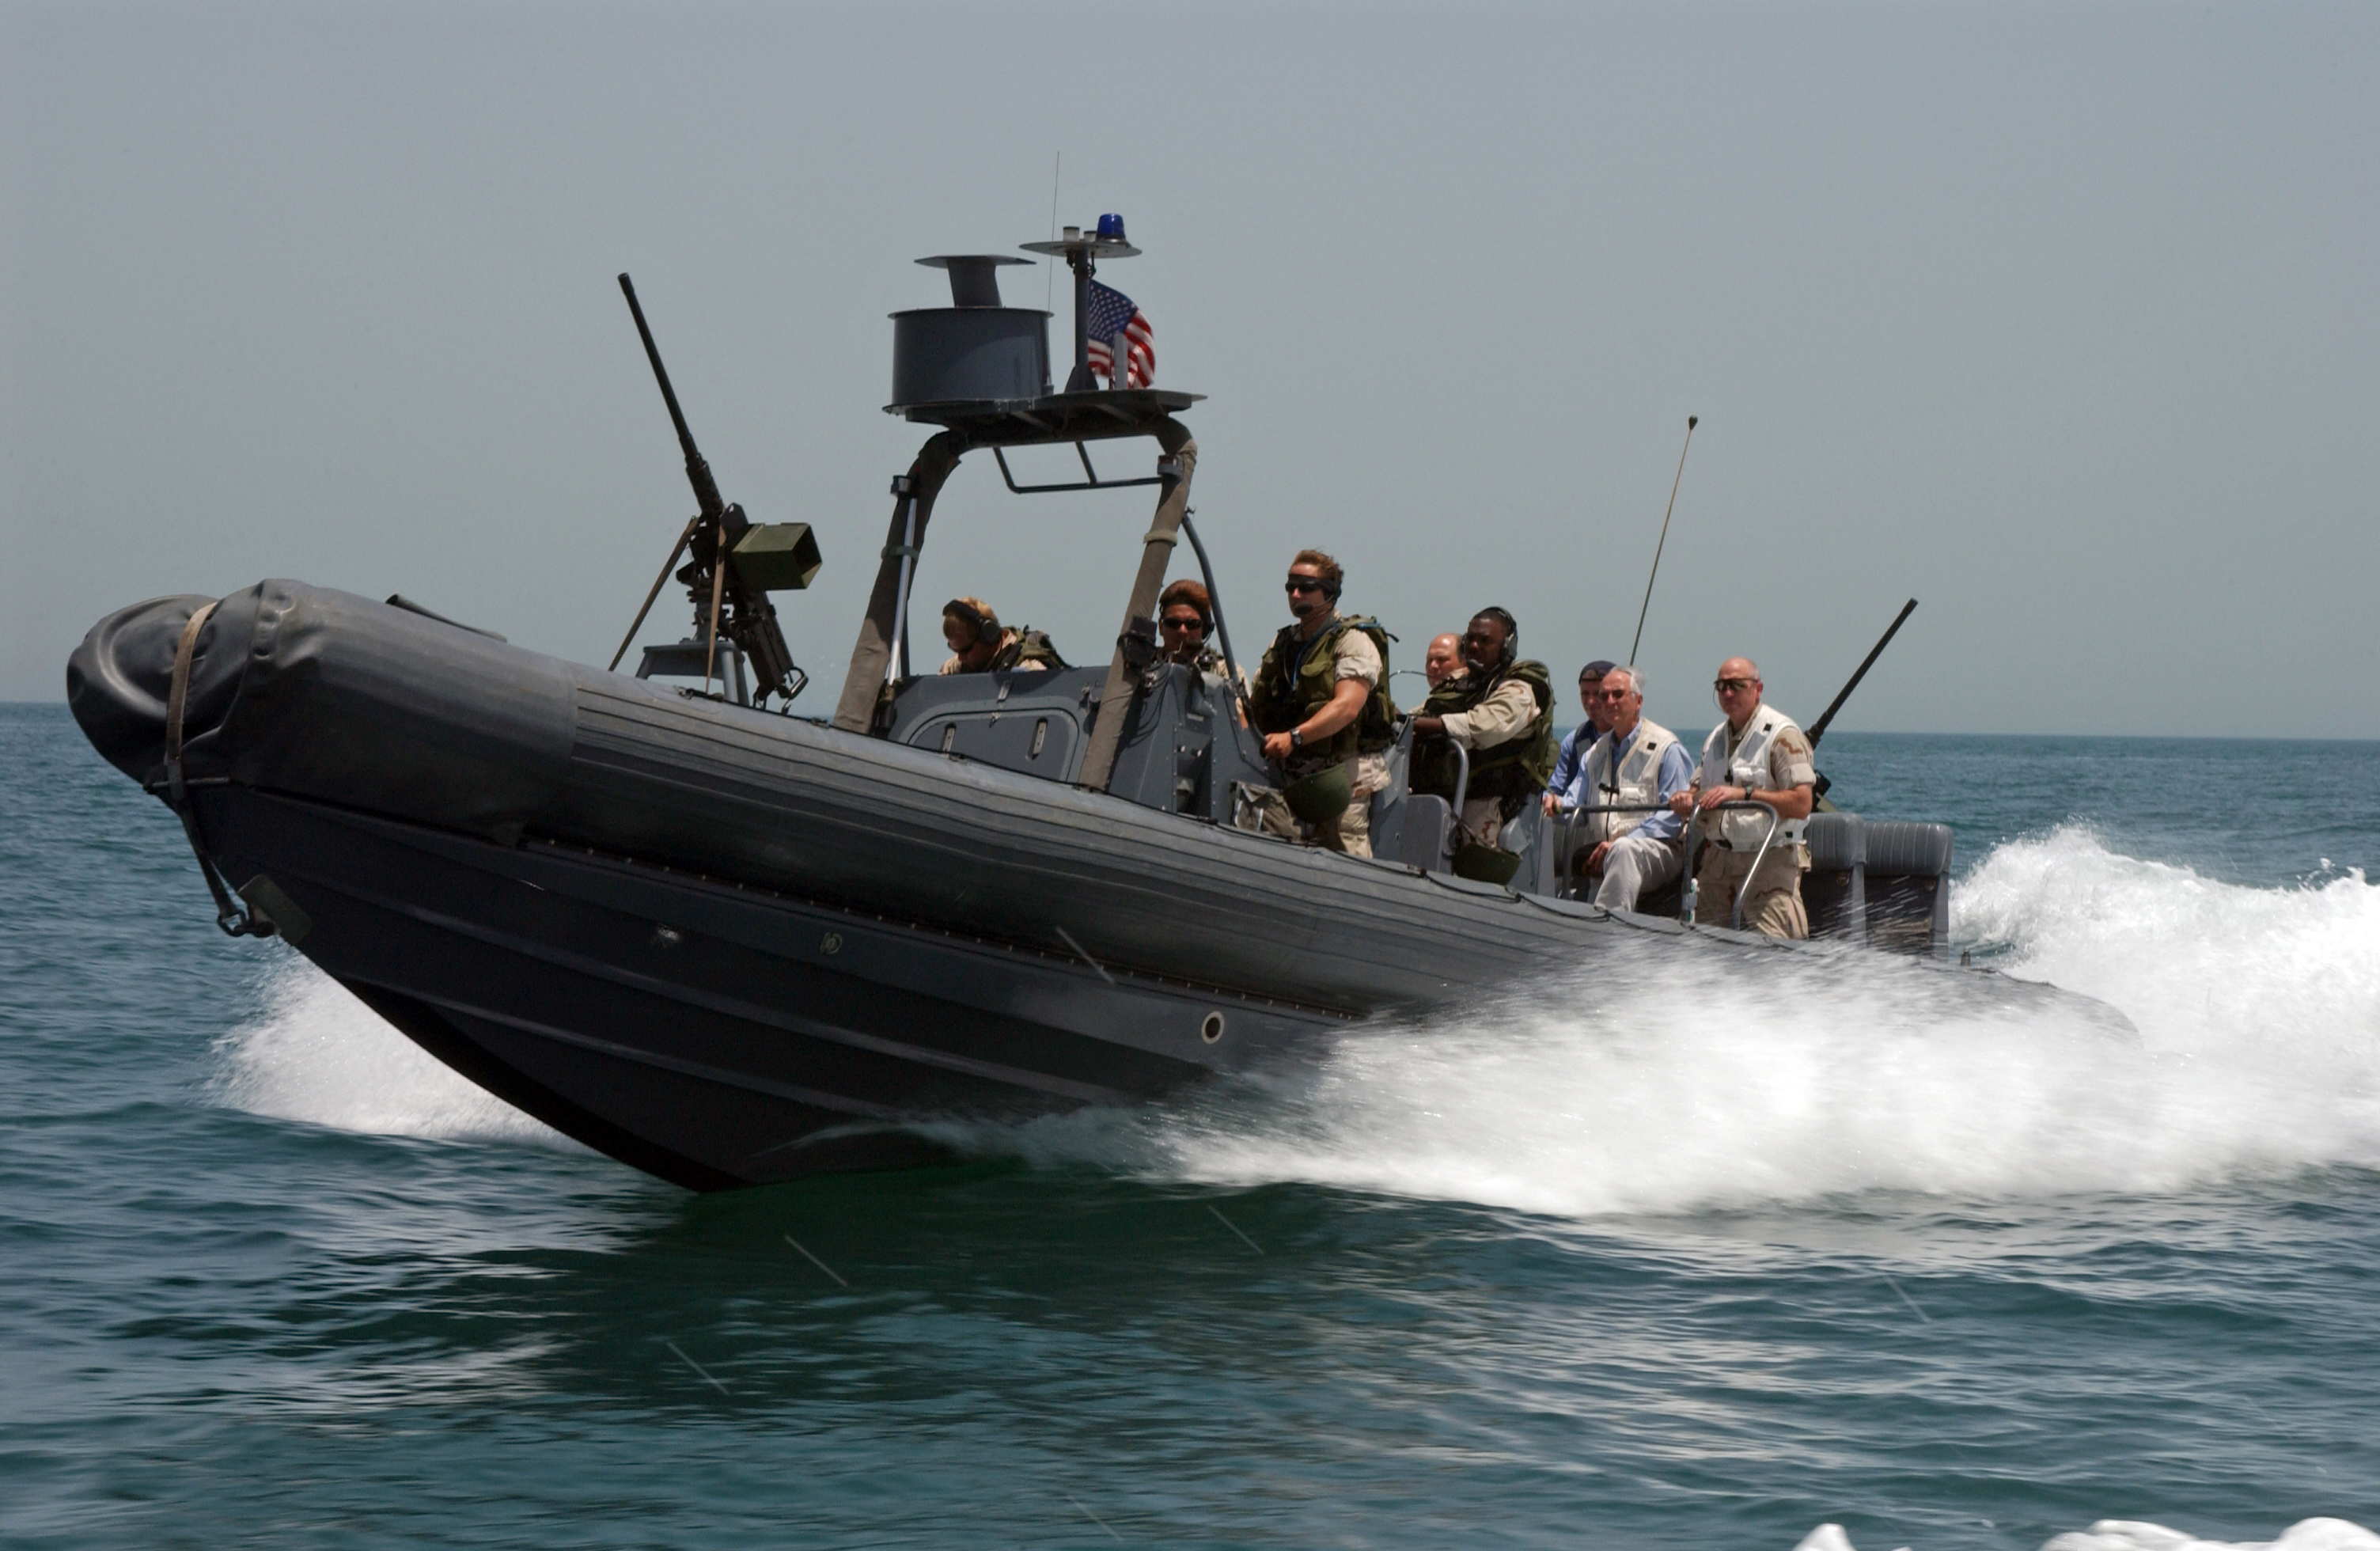 US_Navy_040520-N-7586B-057_Riding_in_a_Rigid_Hull_Inflateable_Boat_(RHIB),_Secretary_of_the_Navy,_Gordon_R._England,_is_transported_from_the_Al_Basrah_Oil_Terminal_(ABOT)_to_the_coastal_patrol_ship_USS_Chinook_(PC_9).jpg